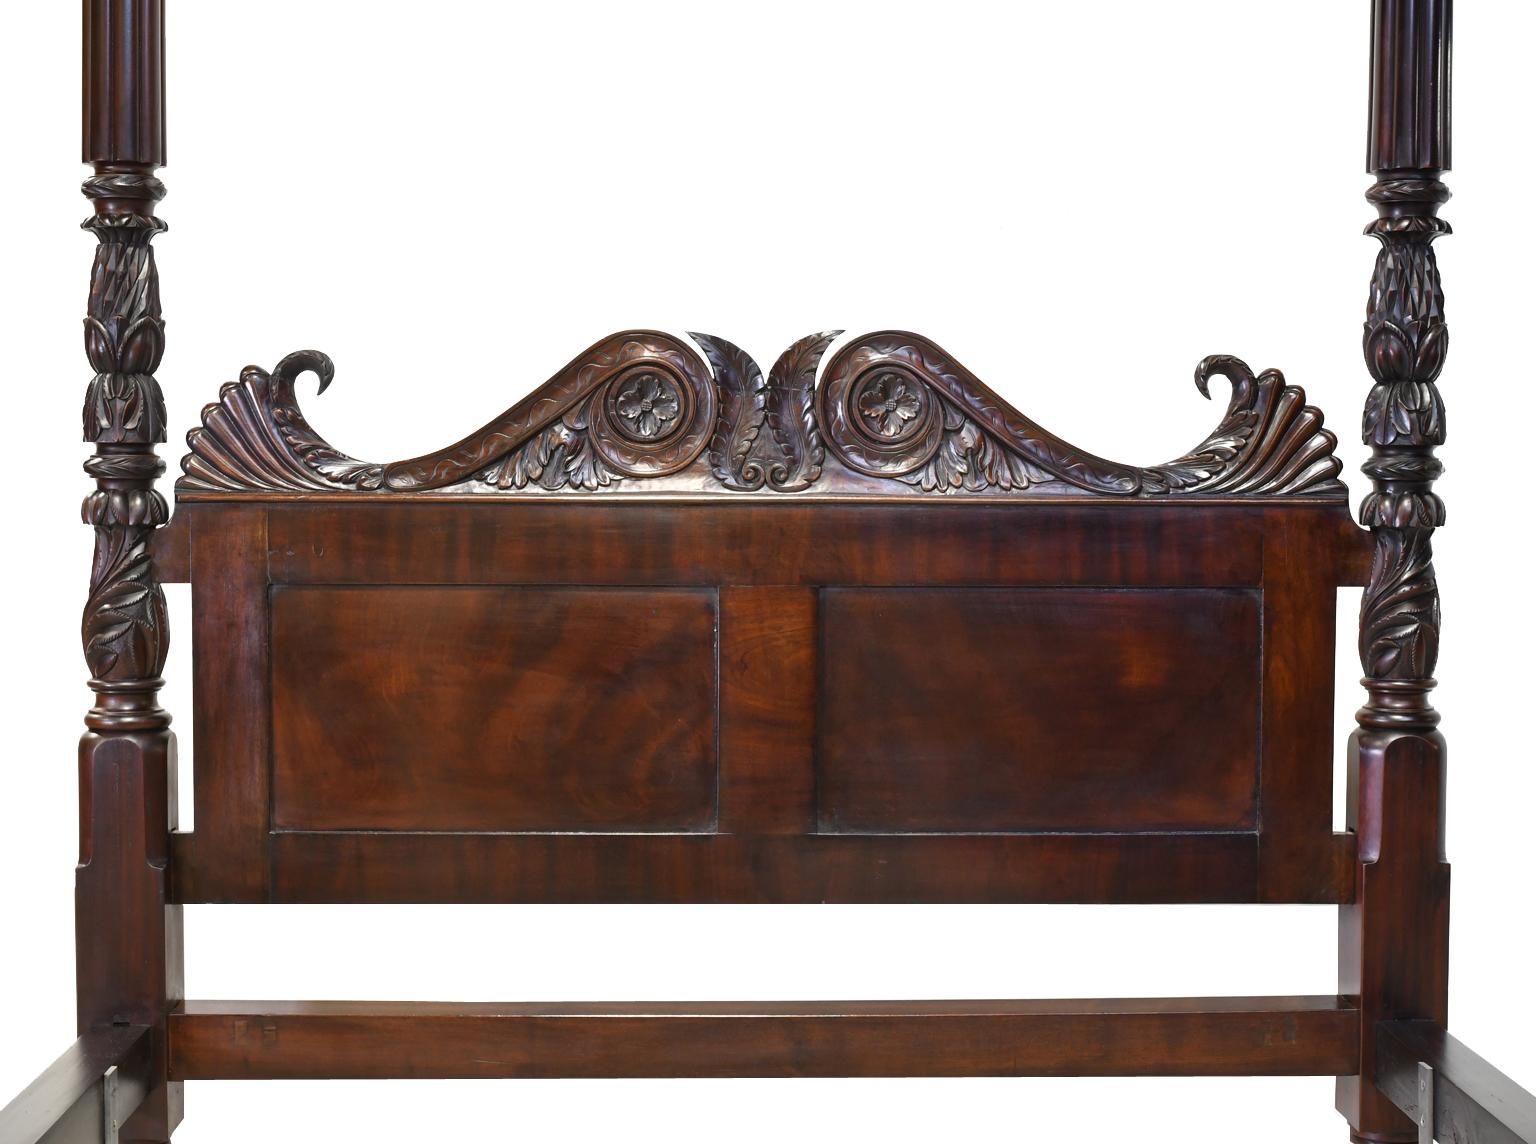 Turned Antique British Colonial Four Poster Queen-Size Bed in Cuban Mahogany, c. 1820